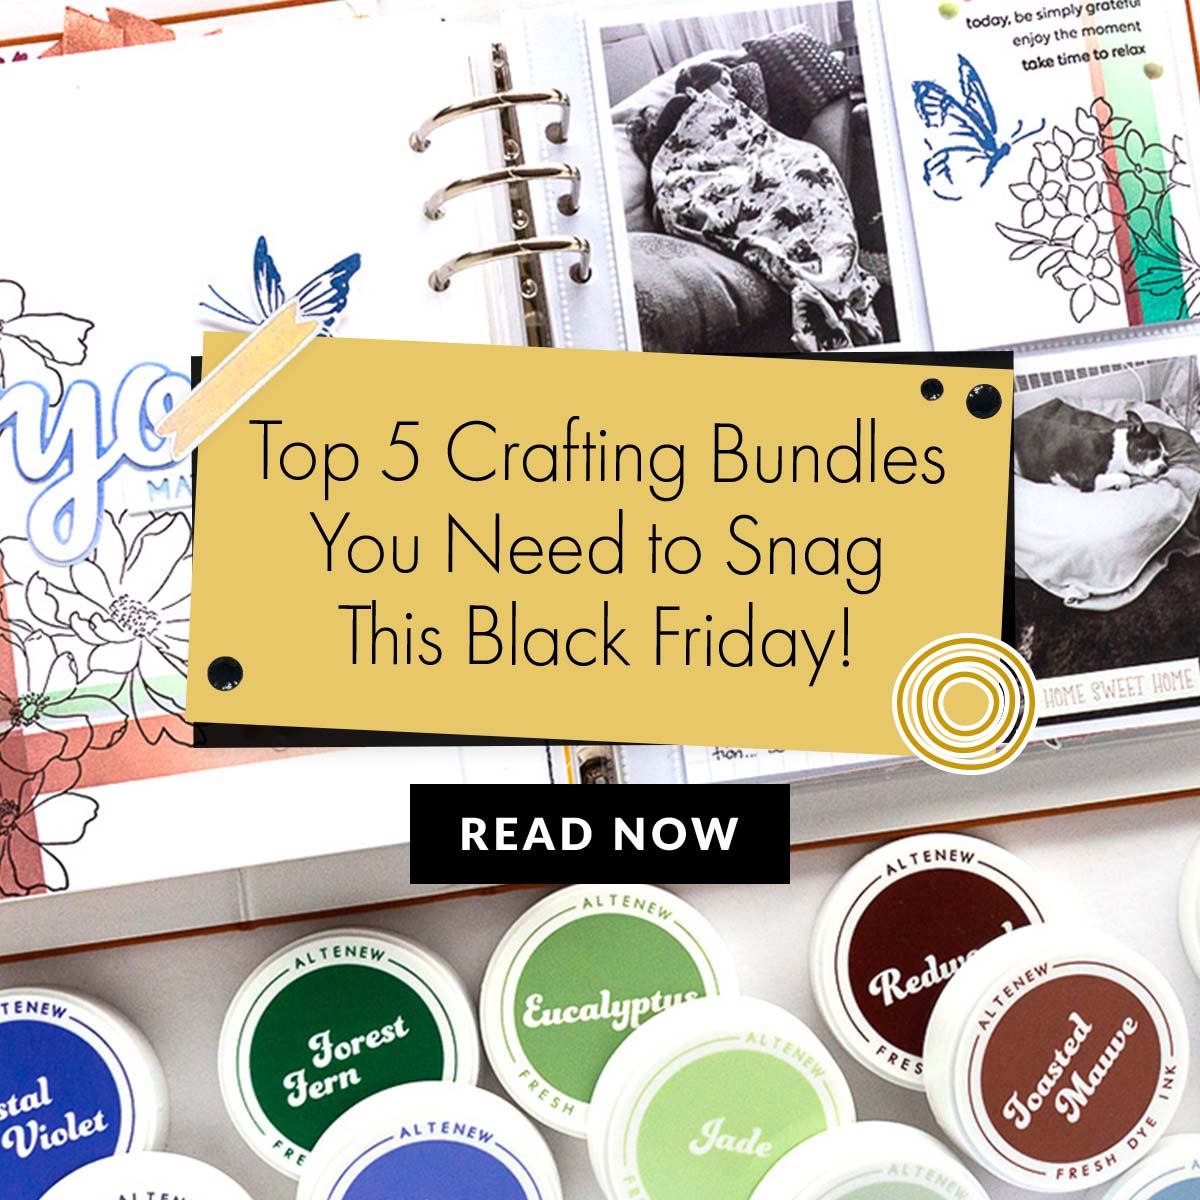 Top 5 Crafting Bundles You Need to Snag This Black Friday